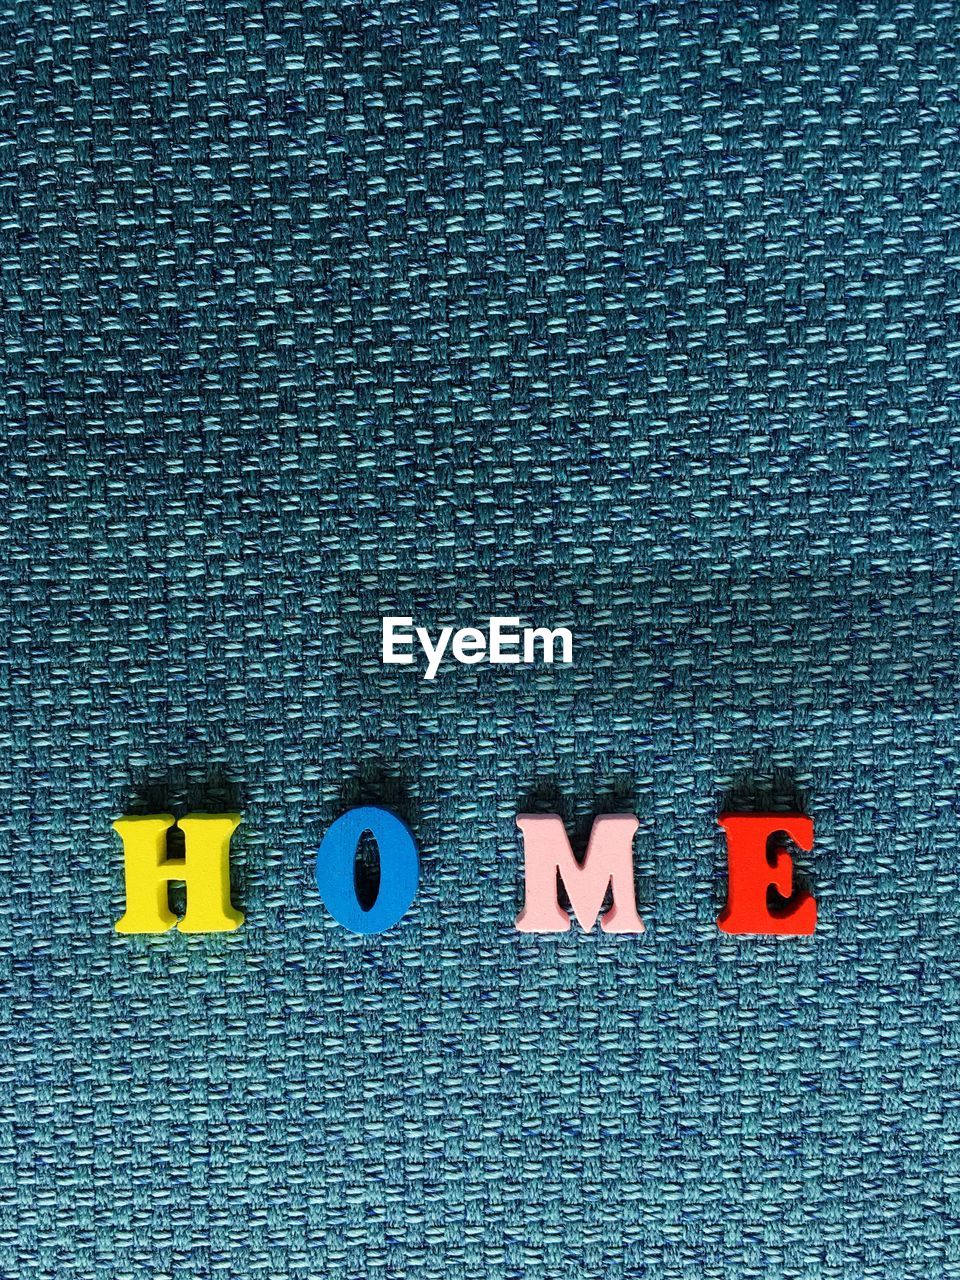 Text made with toy blocks on fabric